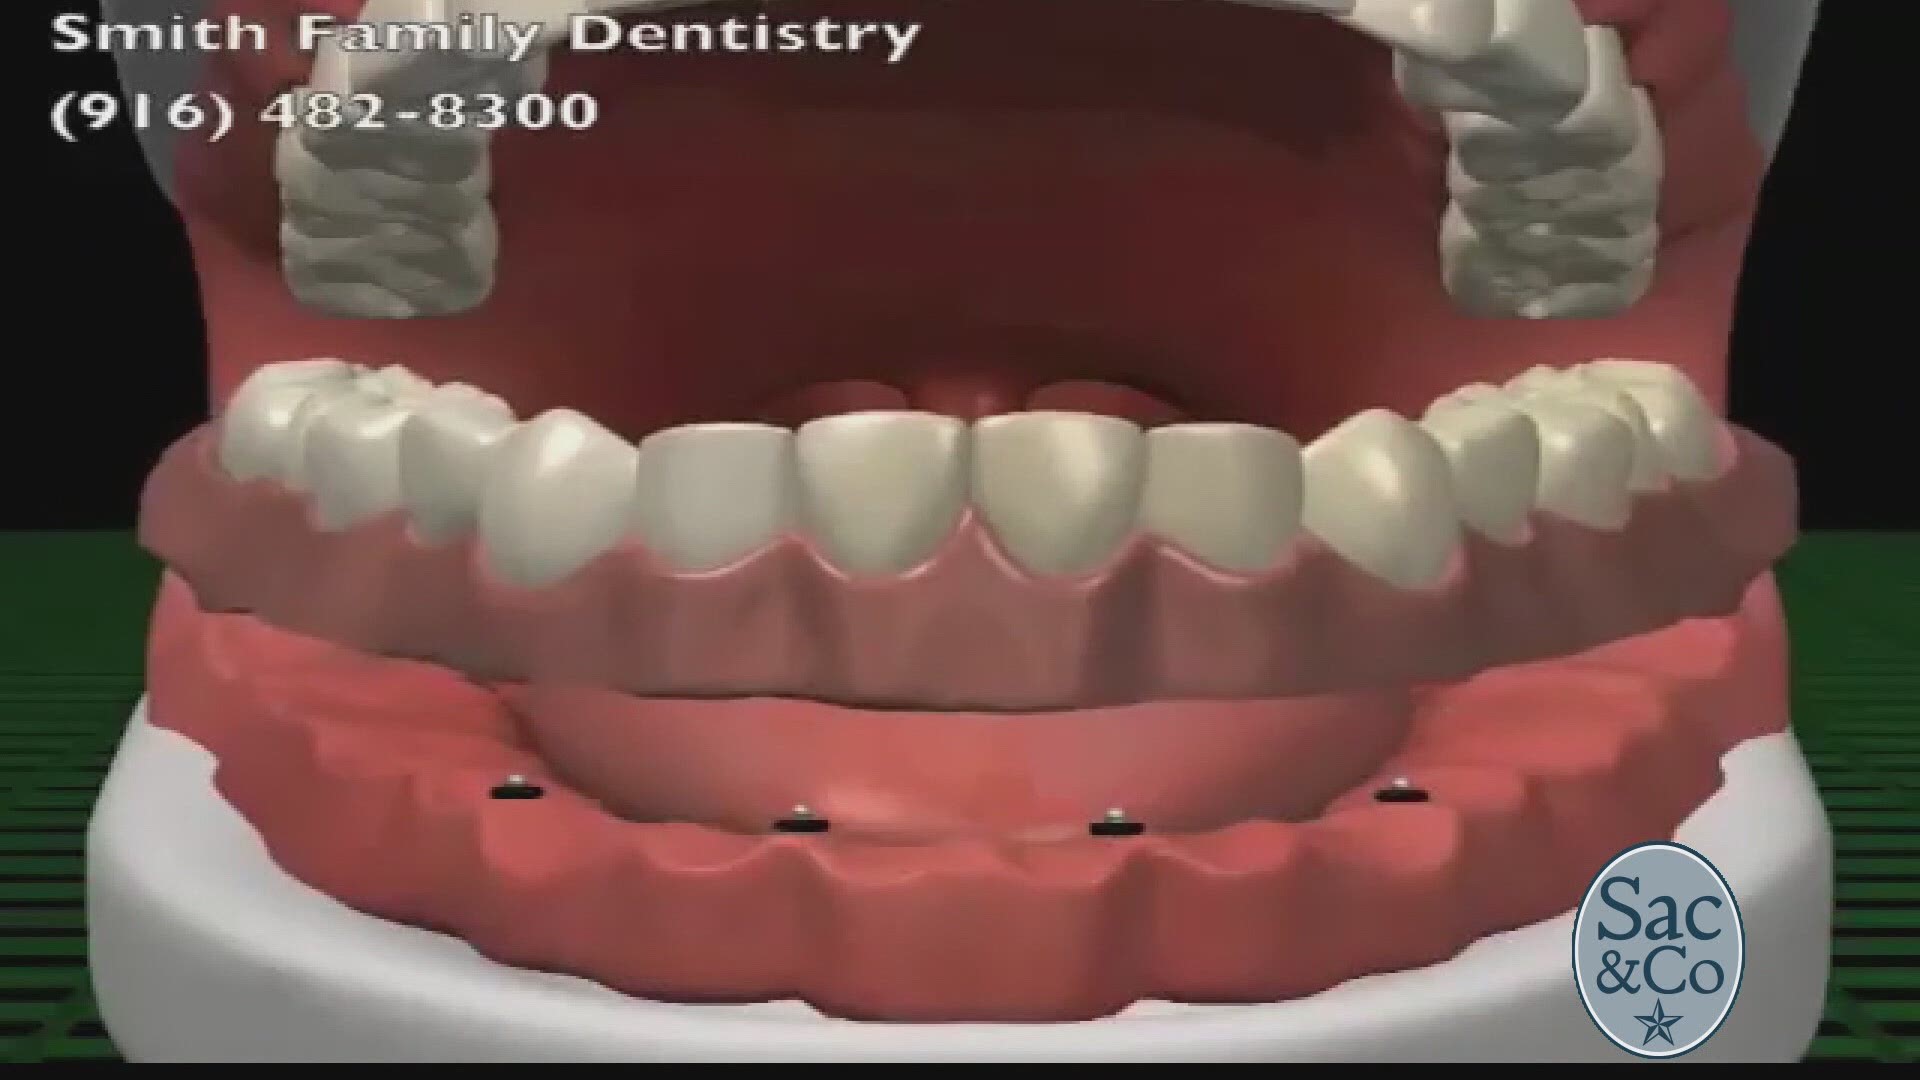 Mellisa Paul chatted with Sacramento’s Dr. Andrea Joy Smith about one of the latest techniques in dentistry. The following is a paid segment sponsored by Dr. Andrea Joy Smith.